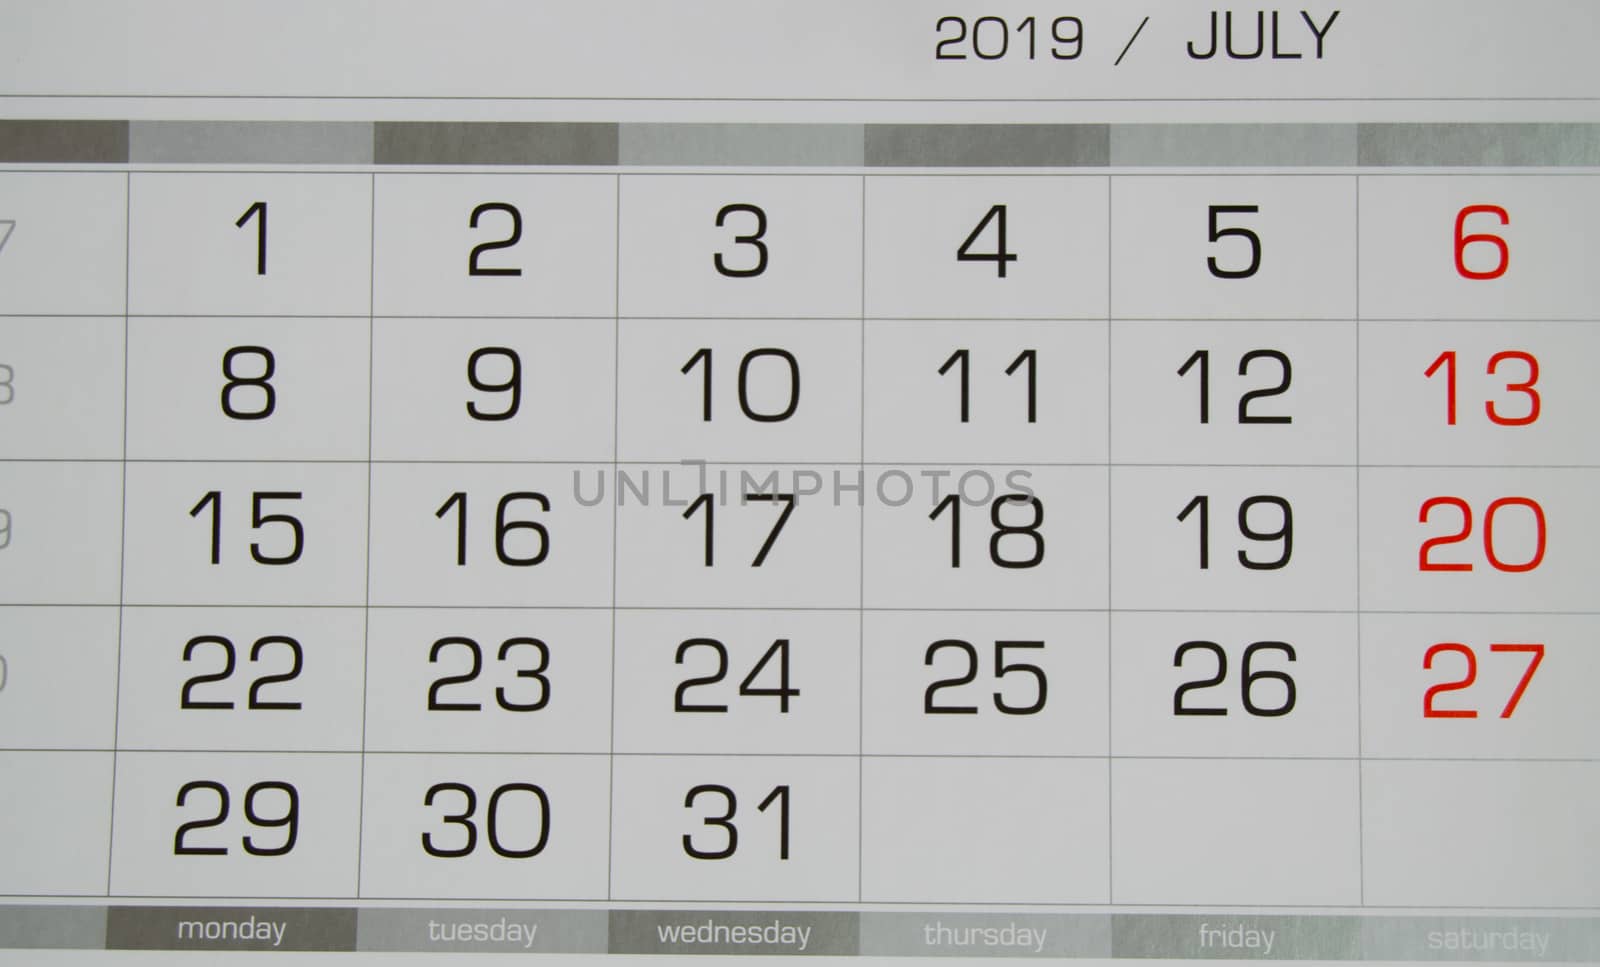 Calendar July 2019 with working days and weekends, close-up top view by claire_lucia